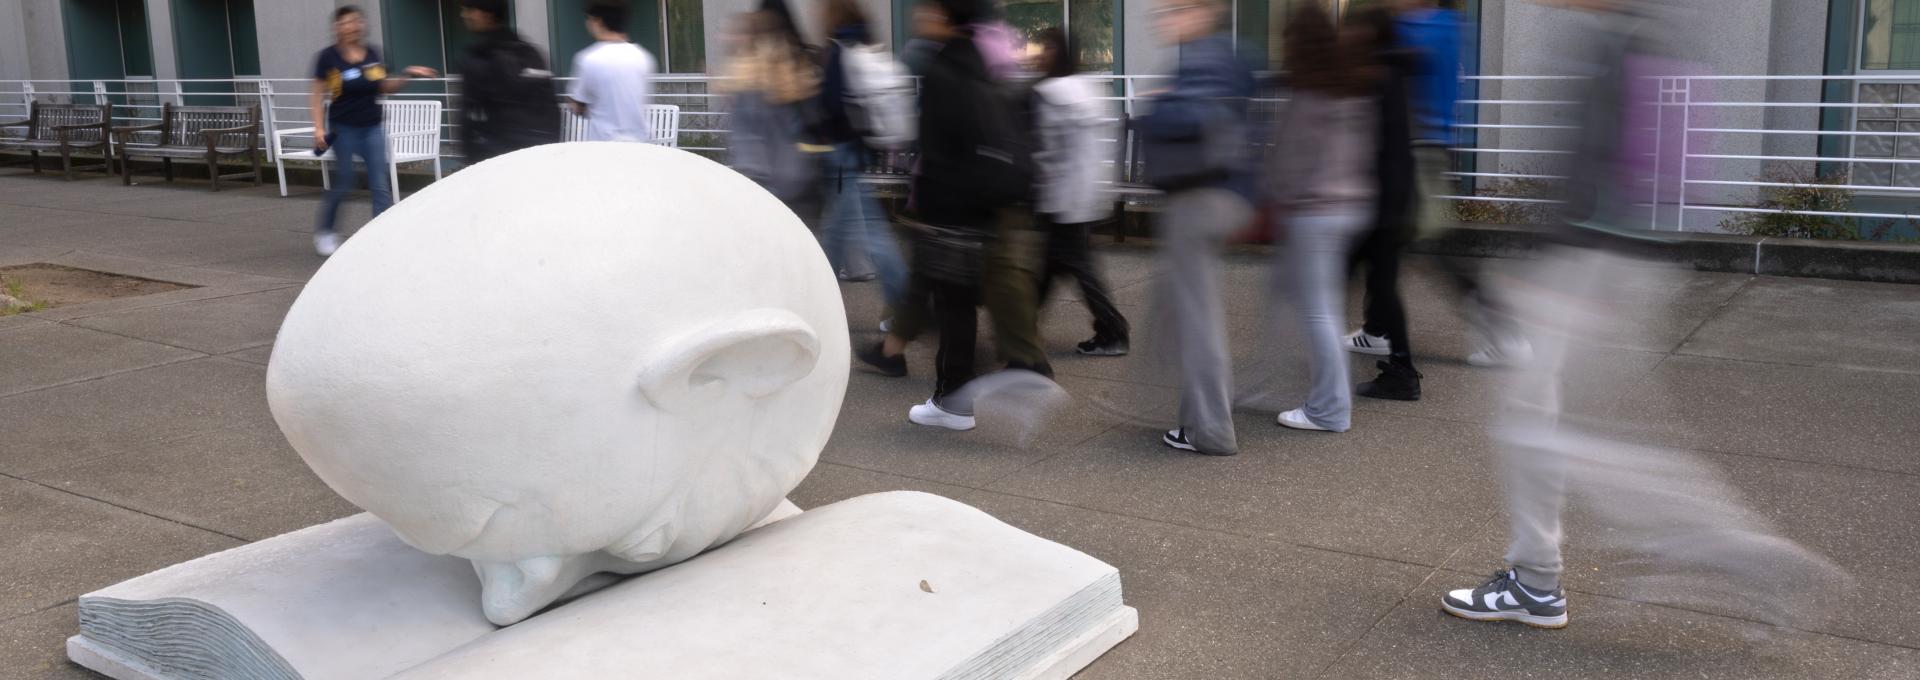 Egghead statue in front of Shields Library